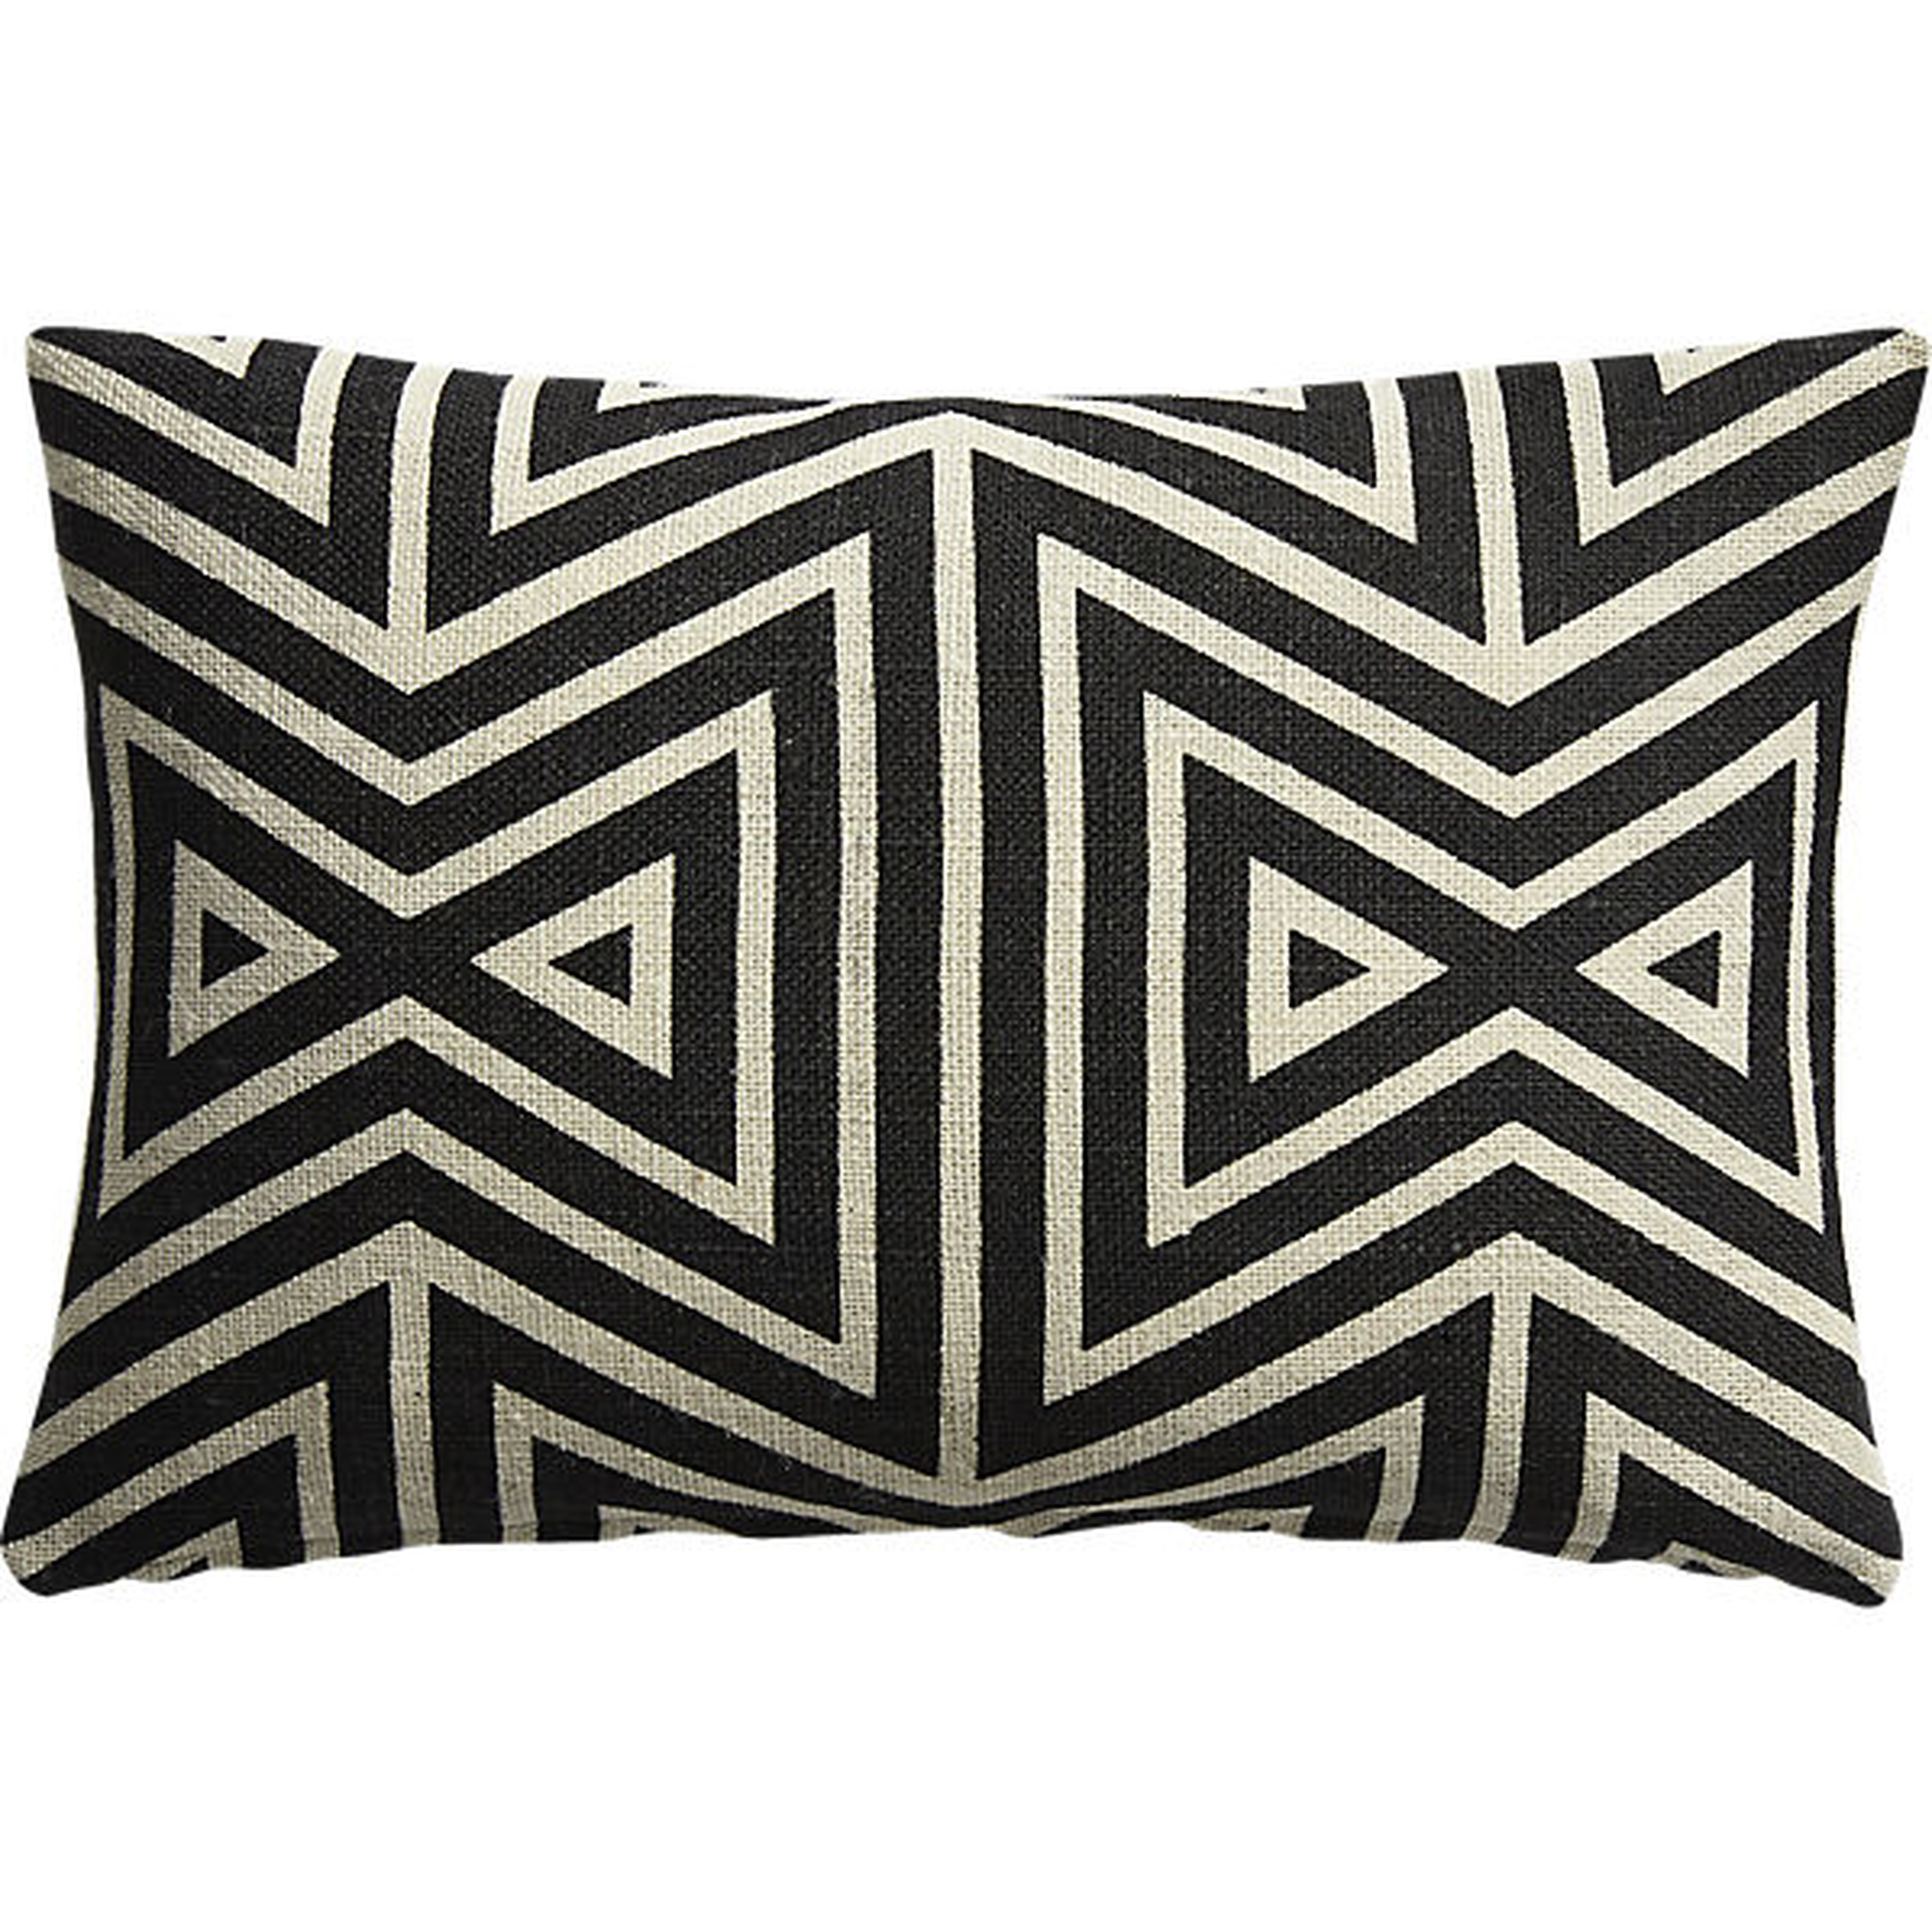 Apani 18"x12" pillow with feather-down insert - CB2